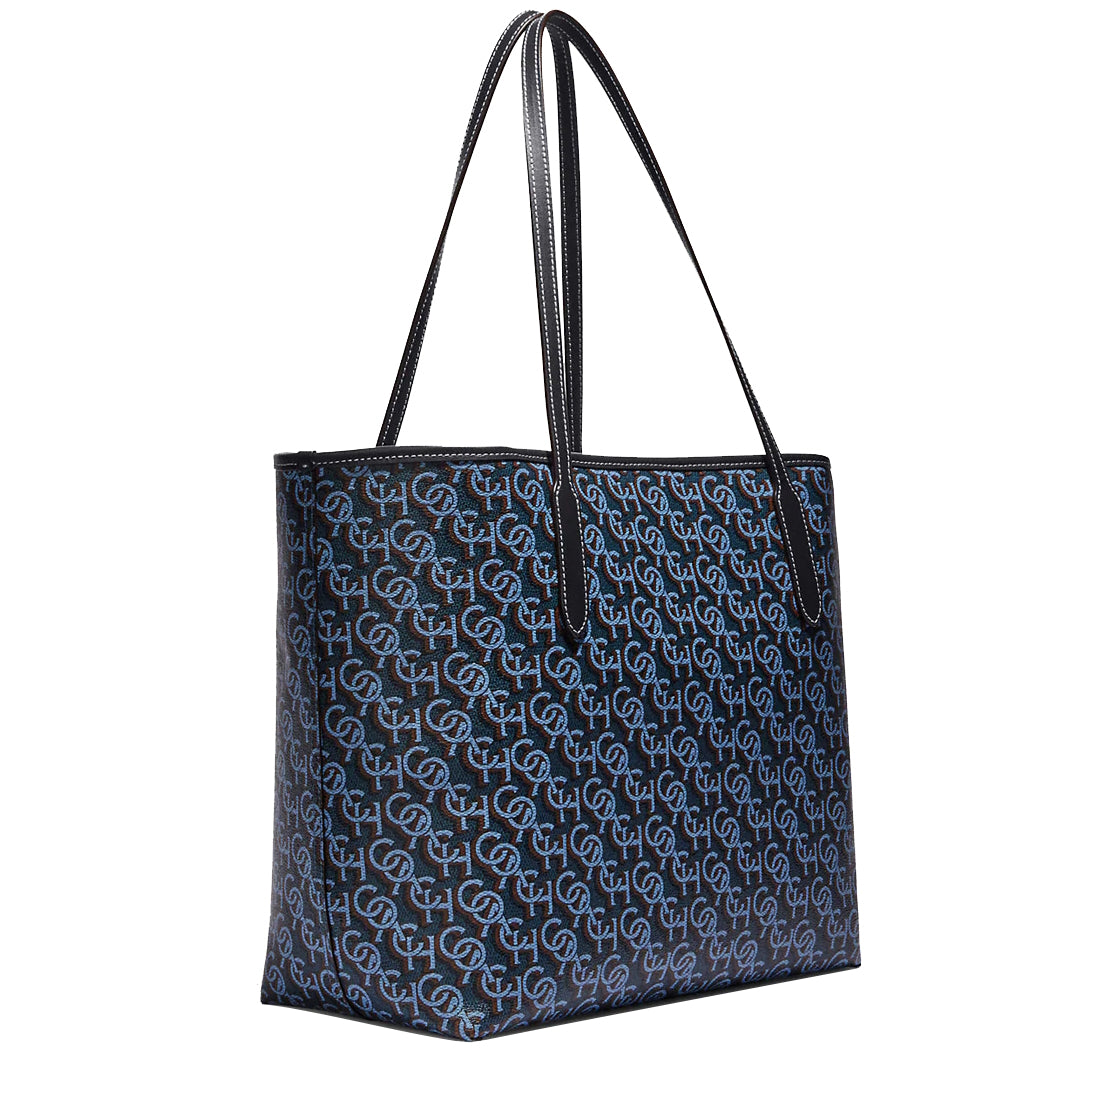 Coach City Tote Bag With Coach Monogram Print in Navy CF342 ...